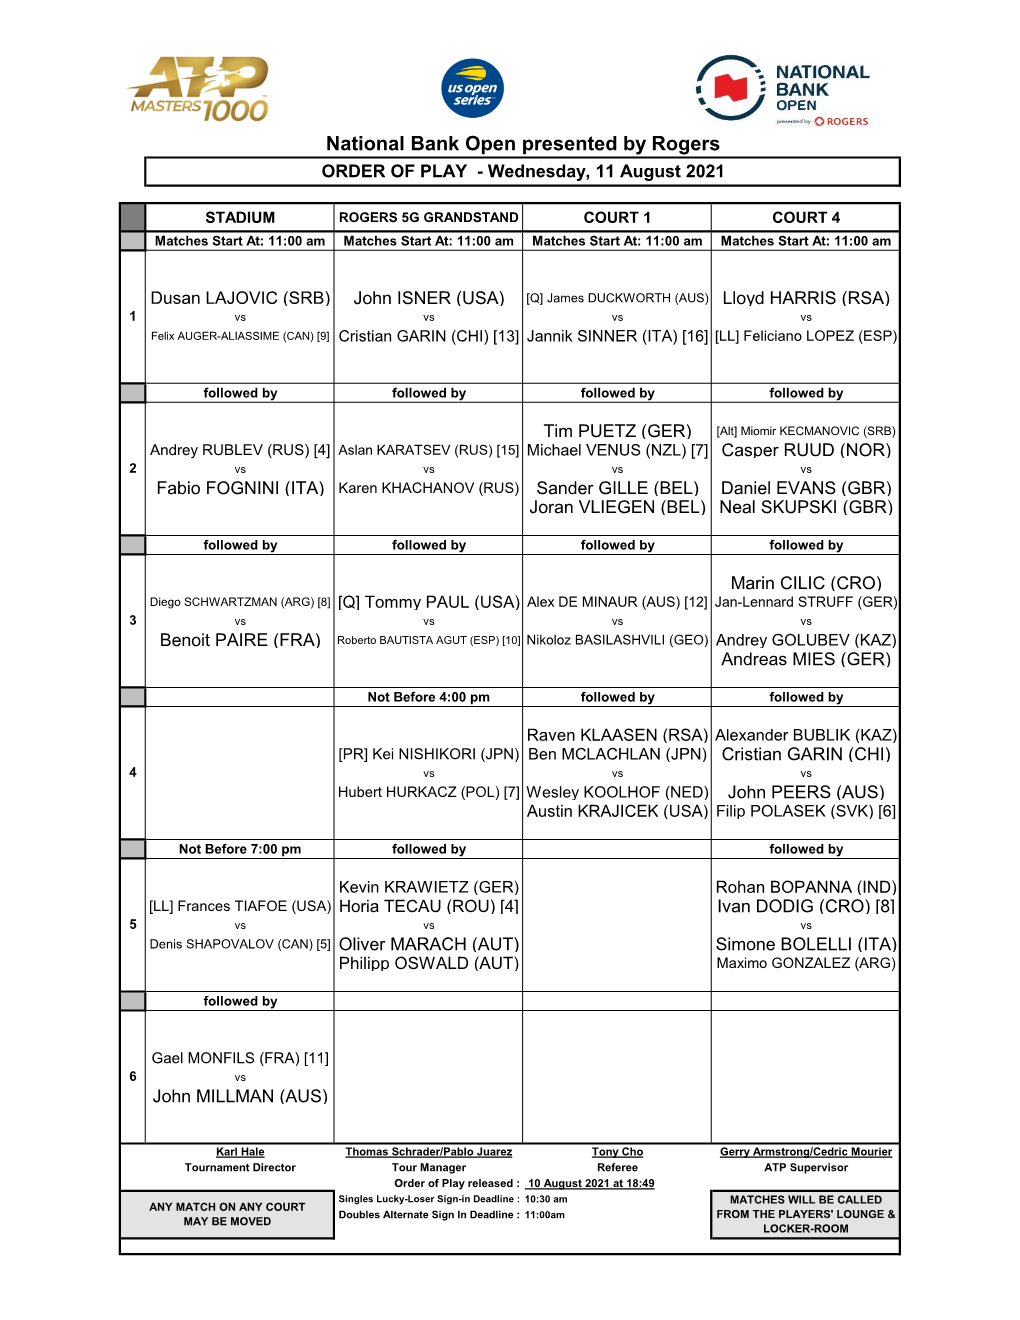 National Bank Open Presented by Rogers ORDER of PLAY - Wednesday, 11 August 2021